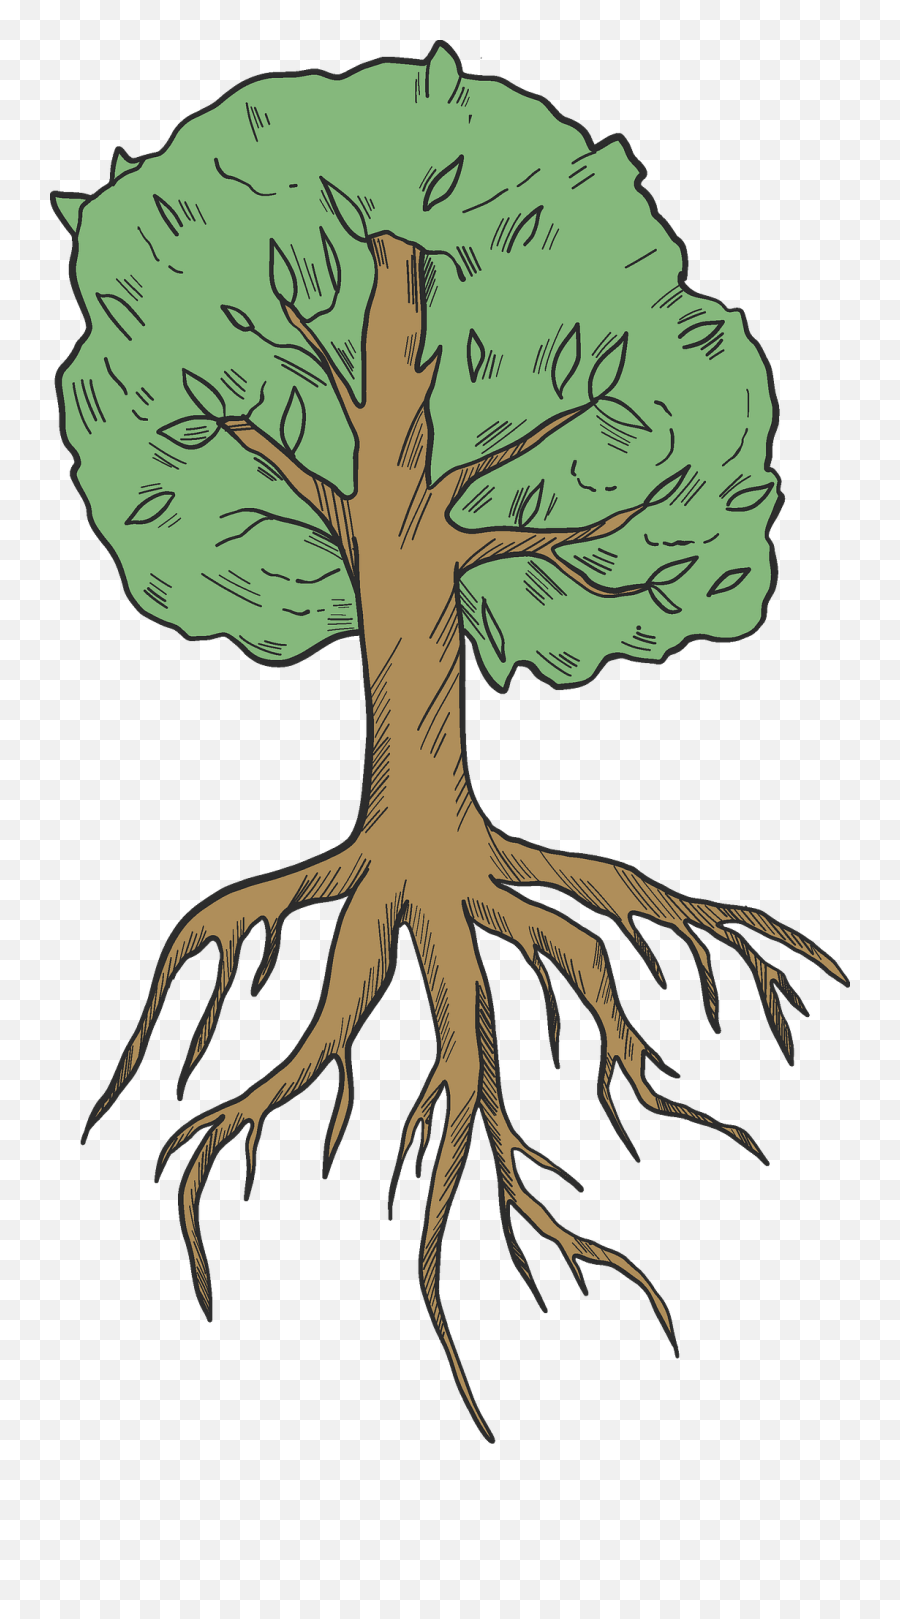 Tree With Roots Clipart - Tree Root Clipart Emoji,Roots Png